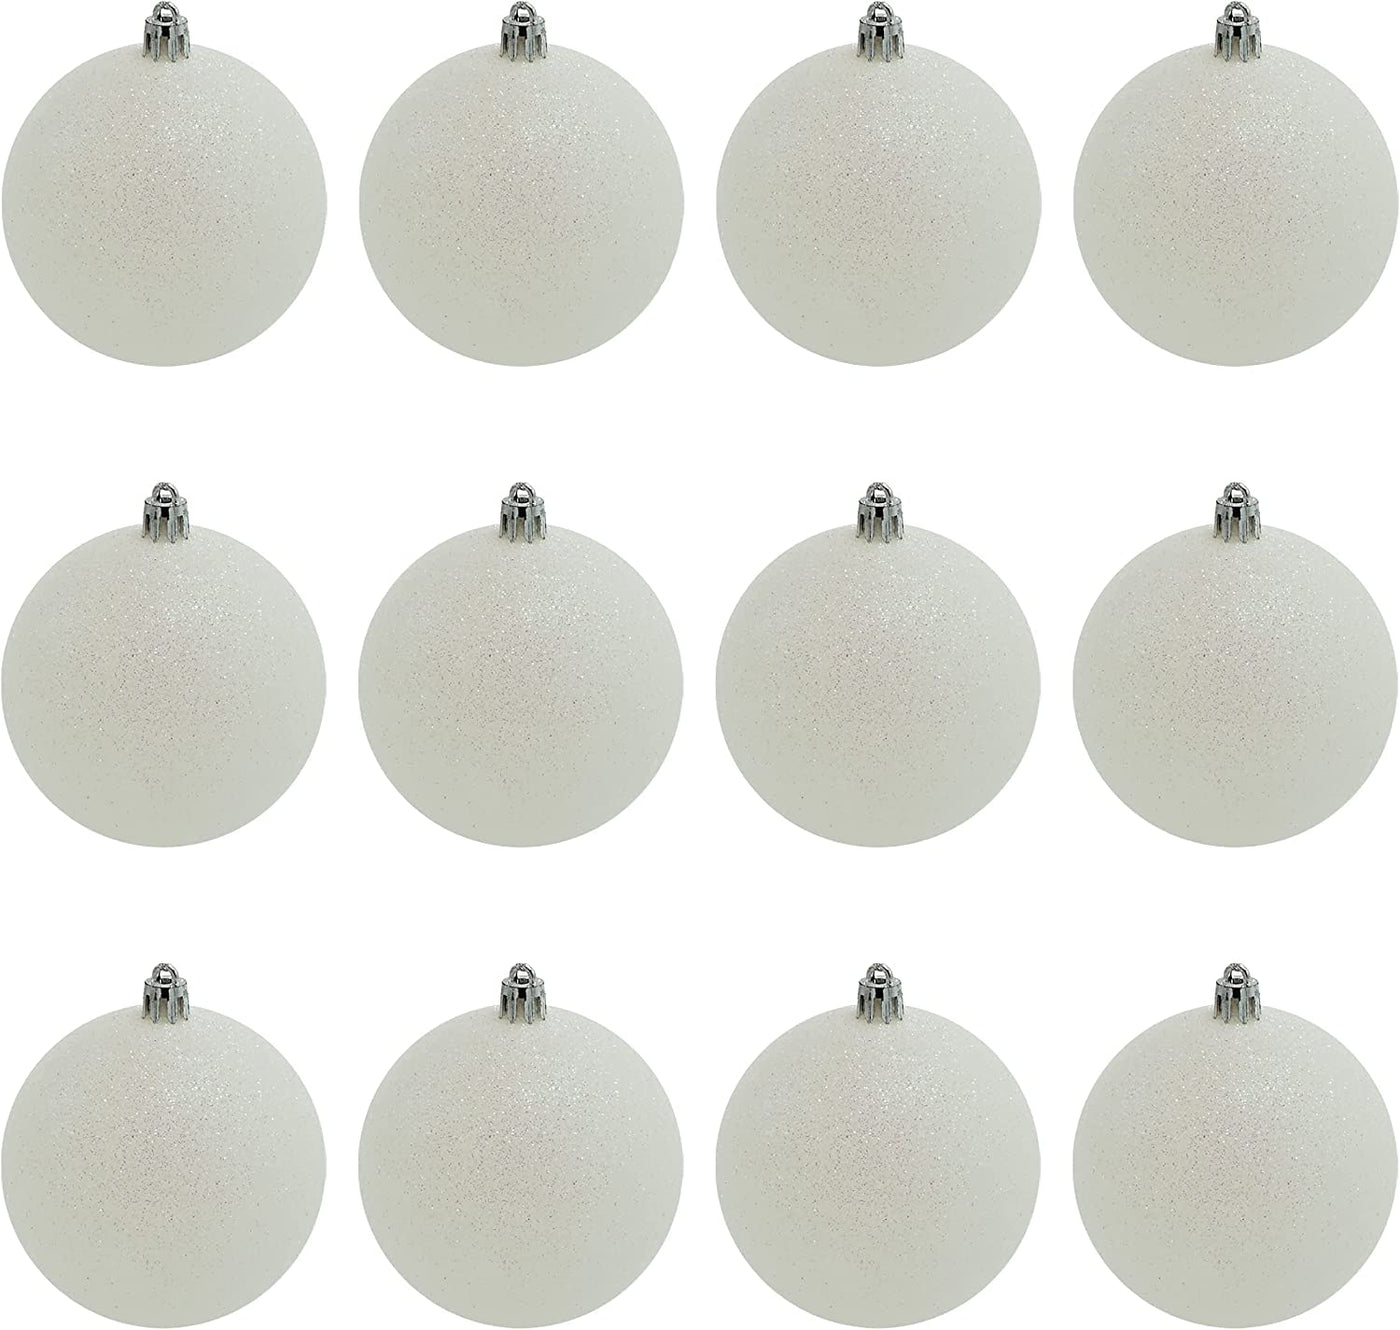 White Snowball Ornament (12 Pack) 3.15" Glitter Snow Ball Iridescent Christmas Ornaments for Christmas Tree Decoration, Shatterproof Plastic Set of 12, by 4E's Novelty